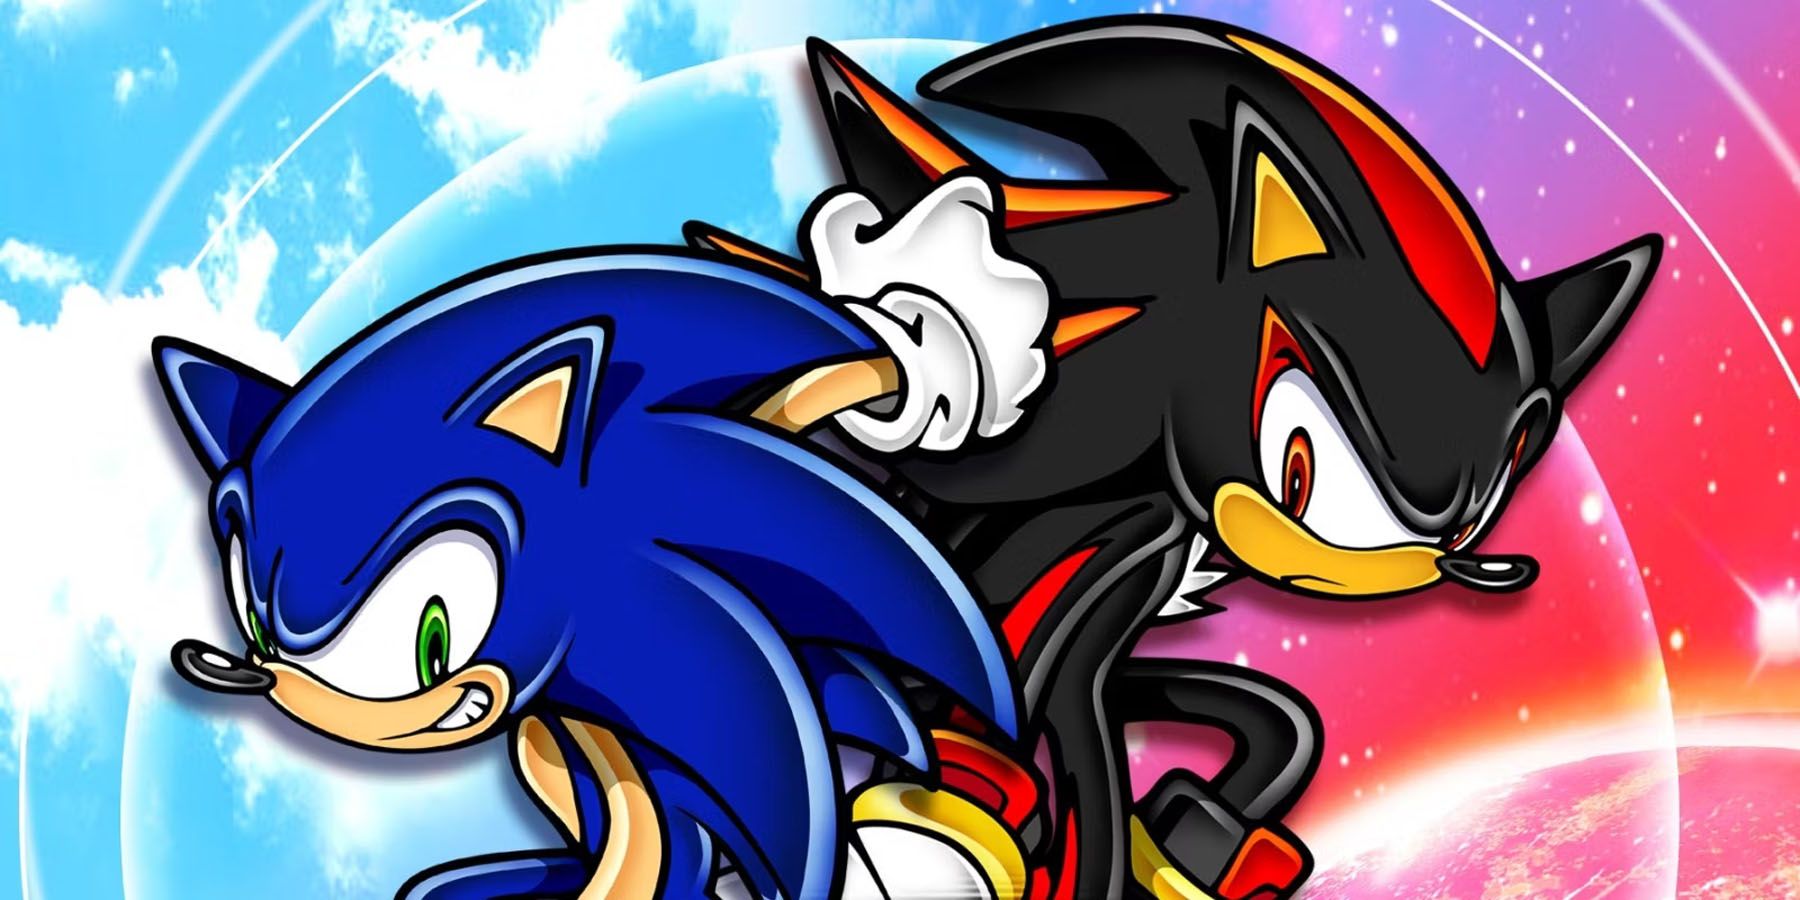 A promotional image of Sonic and Shadow for Sonic Adventure 2.